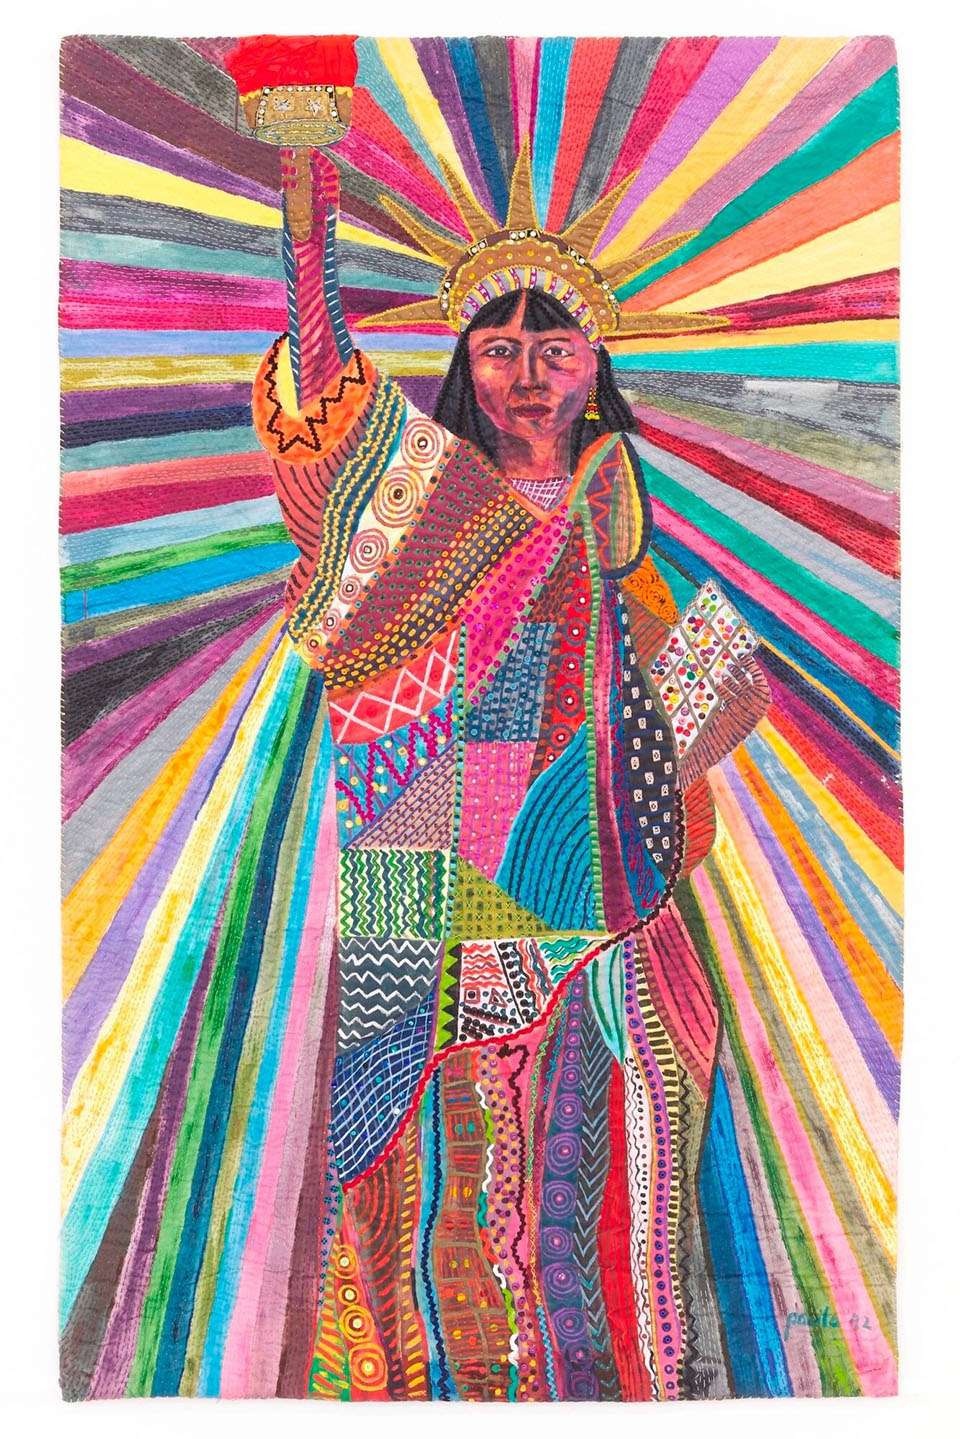 Pacita Abad's painting of a sunset-hued rendition of the Statue of Liberty, dressed in a boldly patterned garb emerging from a sunburst of striped color.